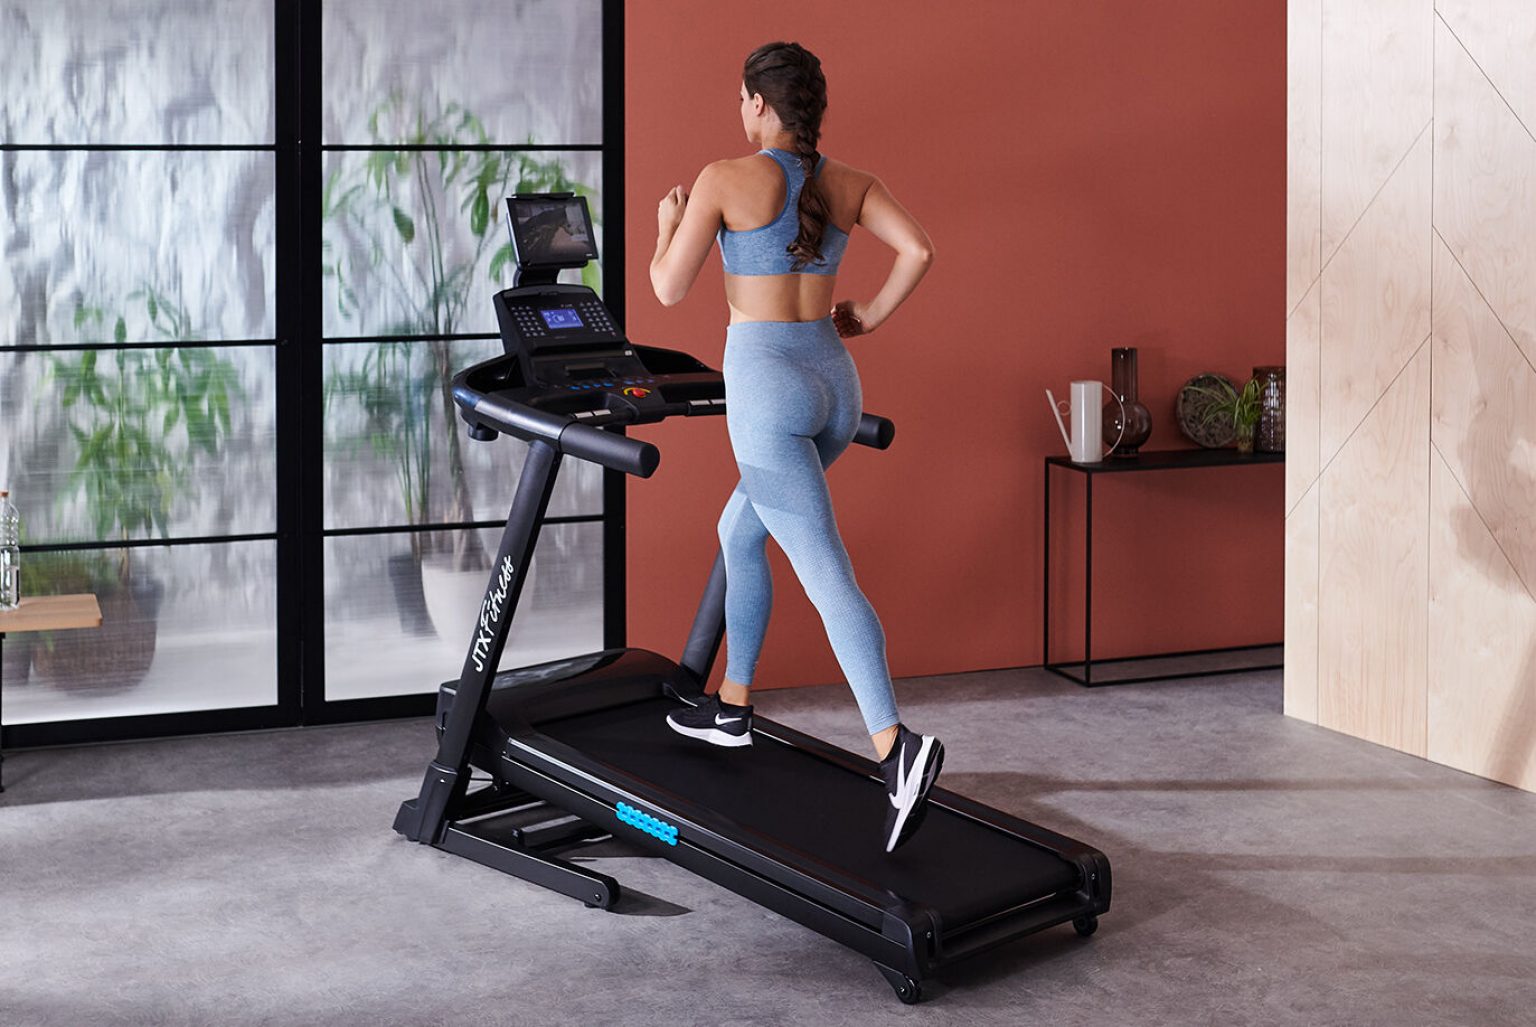 Best Incline Treadmill For Incline Training 1536x1027 